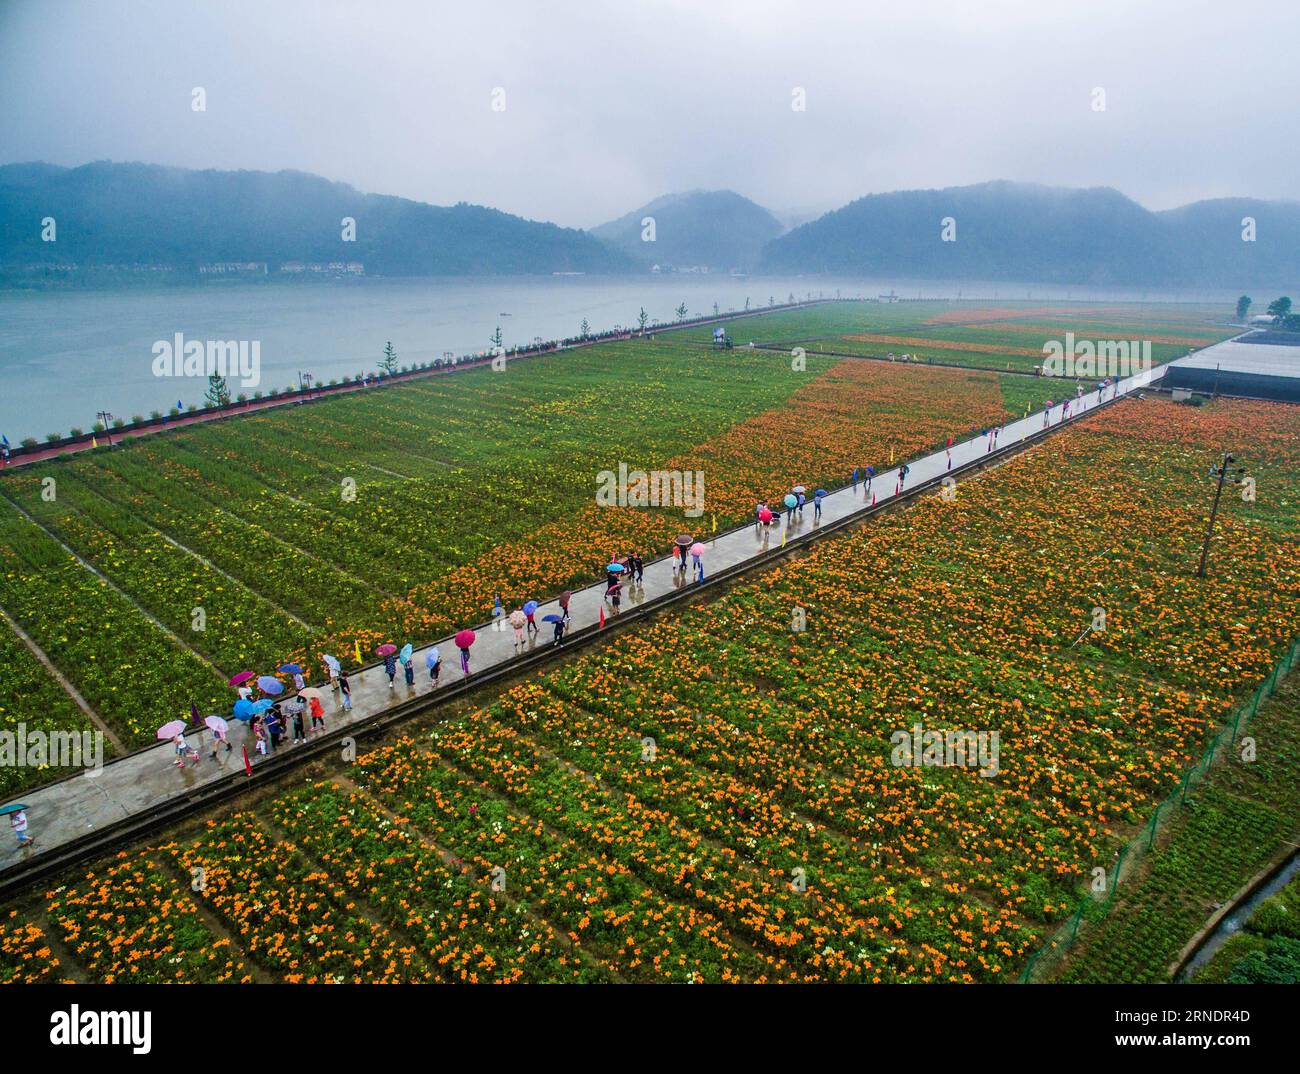 (160528) -- TONGLU, May 28, 2016 -- Tourists walk through the lily field in Fenshui Township of Tonglu County, east China s Zhejiang Province, May 28, 2016. Recenly, lilies in Tonglu county are in full blossom, which attracted many tourists. ) (zhs) CHINA-ZHEJIANG-TONGLU-LILIES (CN) XuxYu PUBLICATIONxNOTxINxCHN   160528 Tonglu May 28 2016 tourists Walk Through The Lily Field in Fenshui Township of Tonglu County East China S Zhejiang Province May 28 2016 recenly lilies in Tonglu County are in Full Blossom Which attracted MANY tourists zhs China Zhejiang Tonglu lilies CN XuxYu PUBLICATIONxNOTxIN Stock Photo